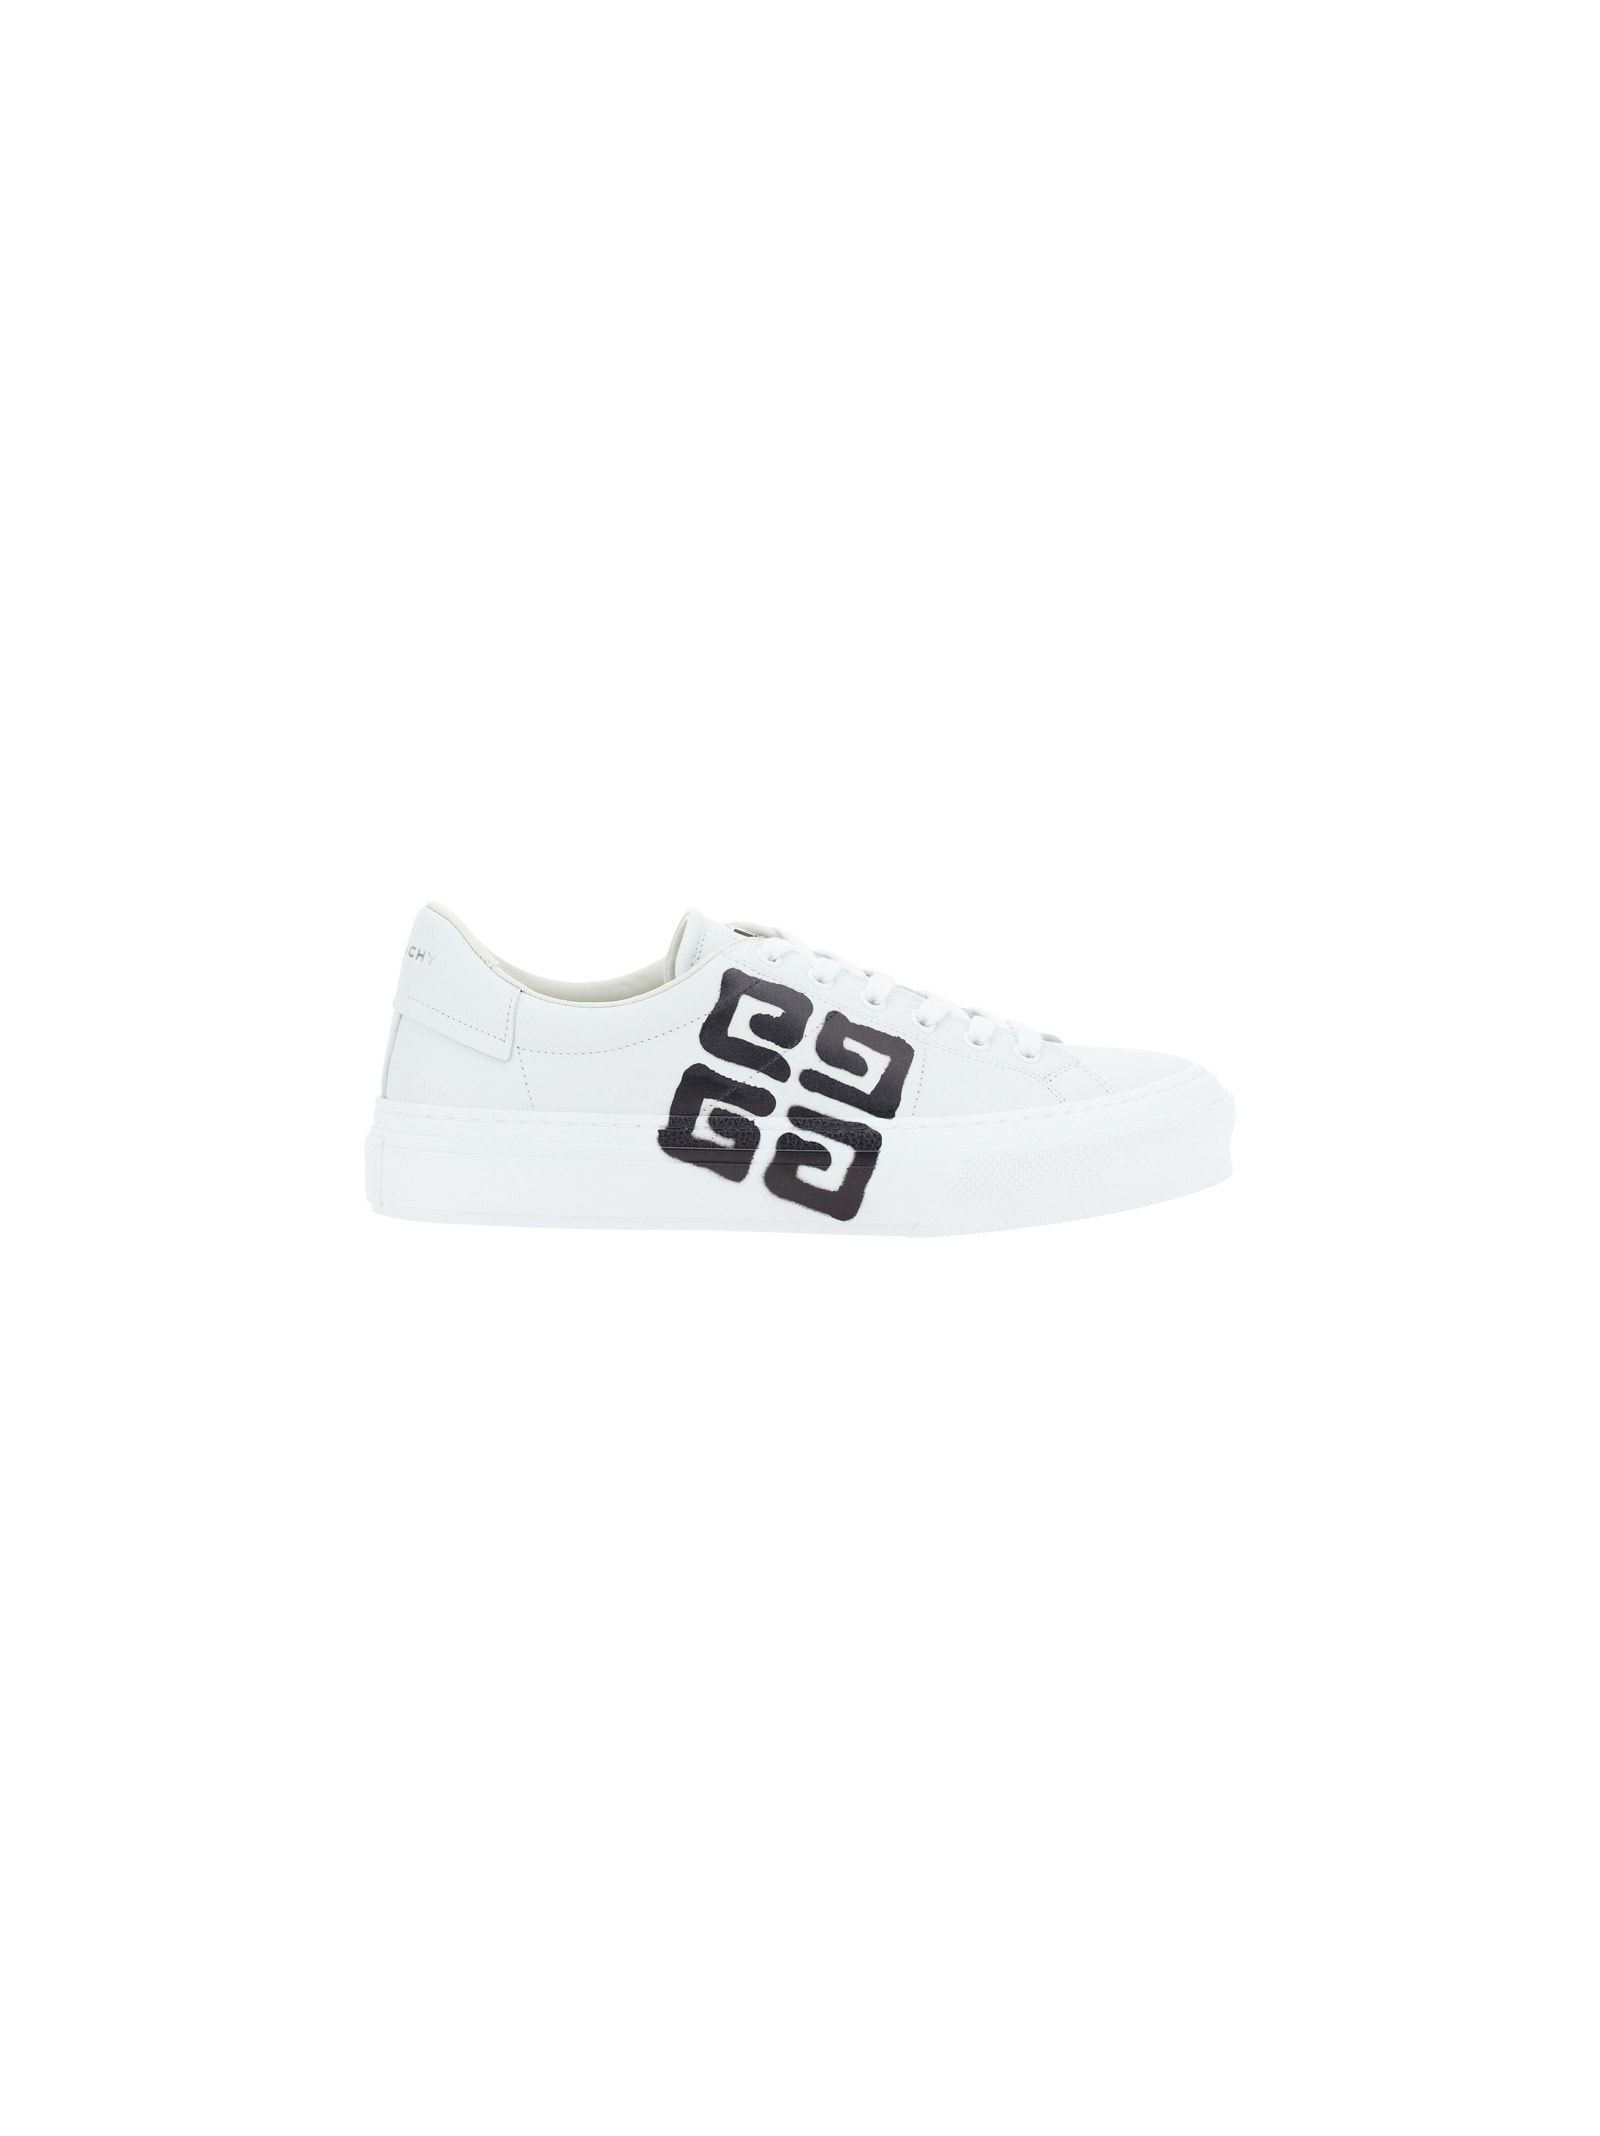 GIVENCHY CITY SPORT PRINTED SNEAKERS